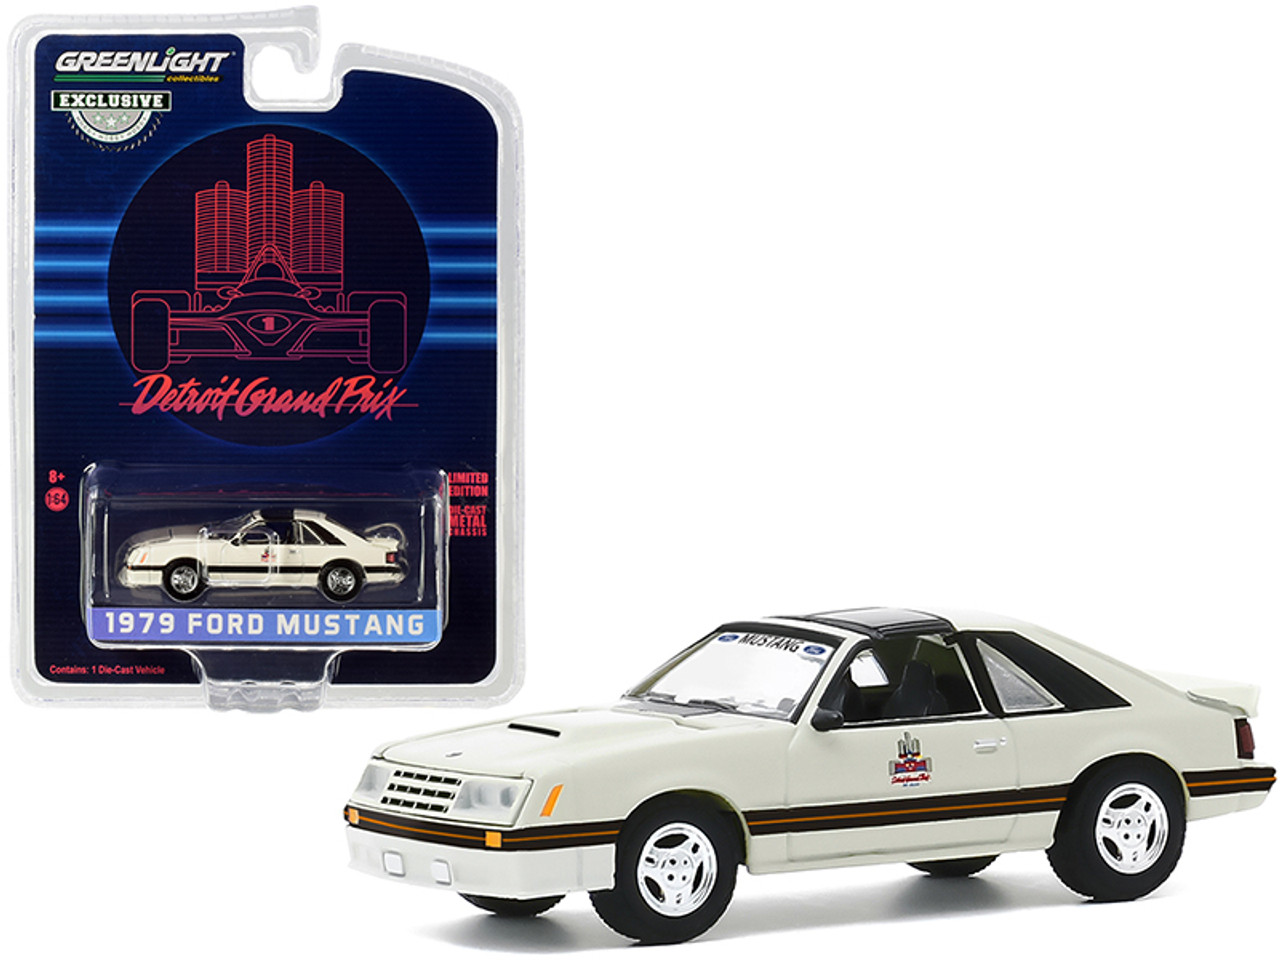 1979 Ford Mustang Official Pace Car "1982 Detroit Grand Prix" "Hobby Exclusive" 1/64 Diecast Model Car by Greenlight